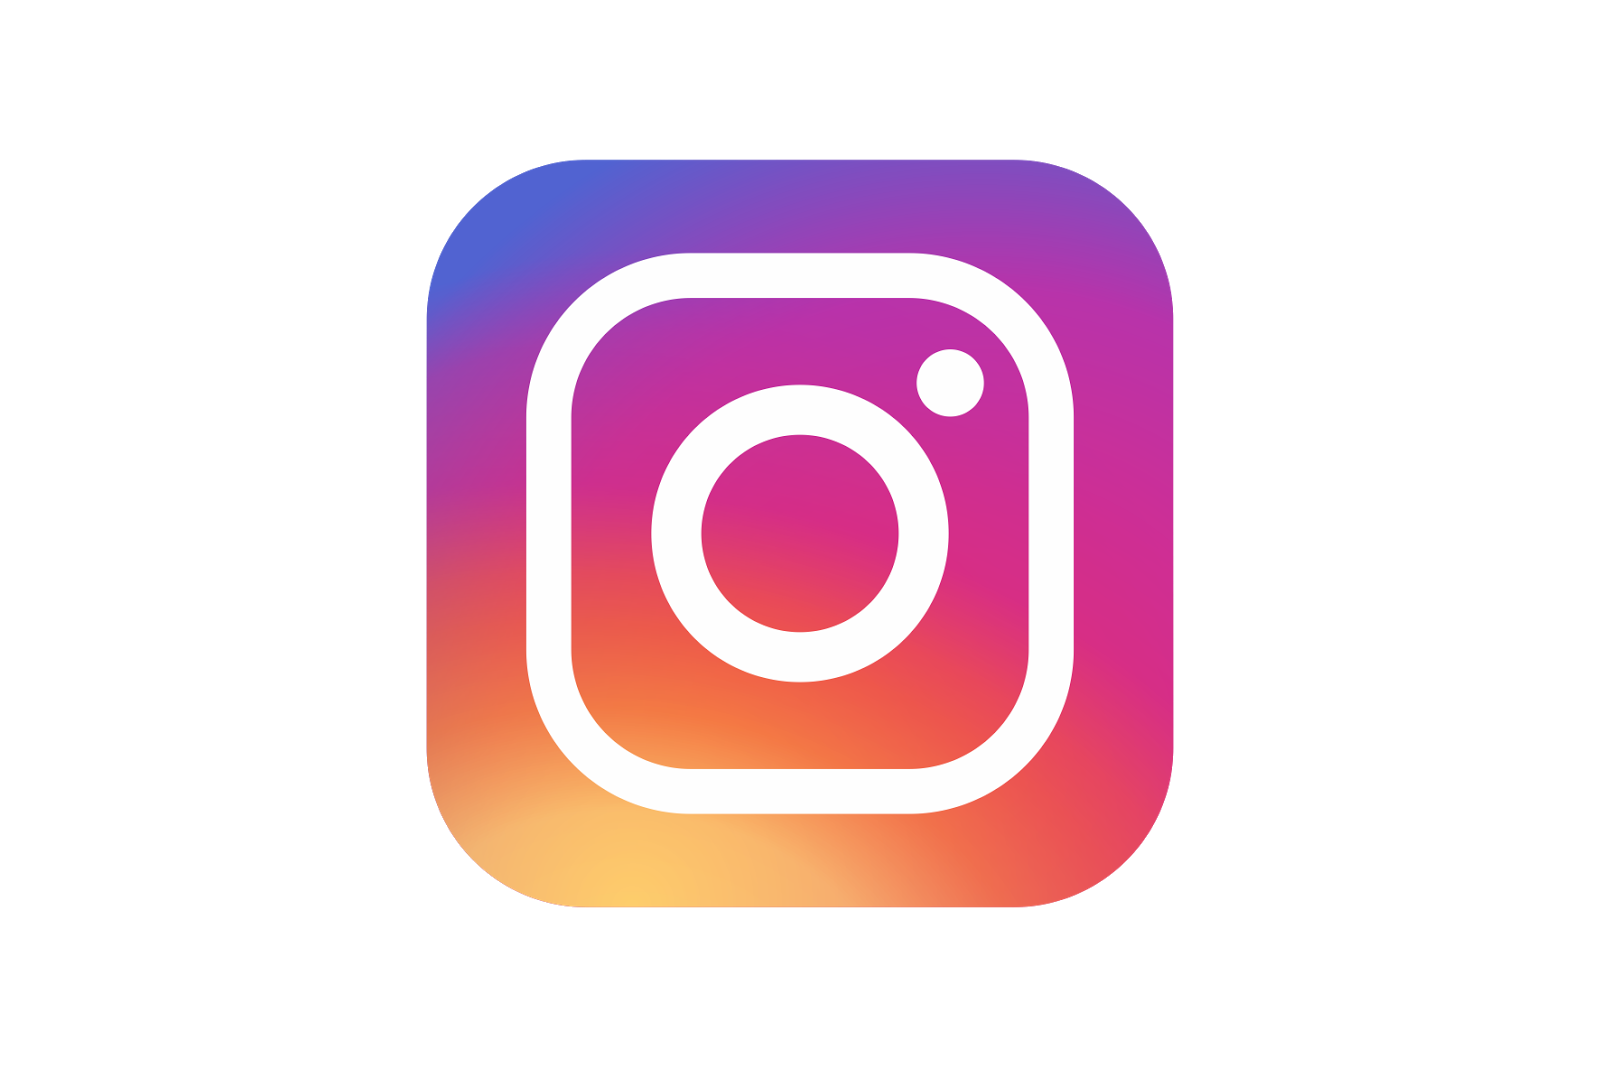 Download Logo Computer Camera Instagram Icons HQ Image Free PNG ICON free | FreePNGImg